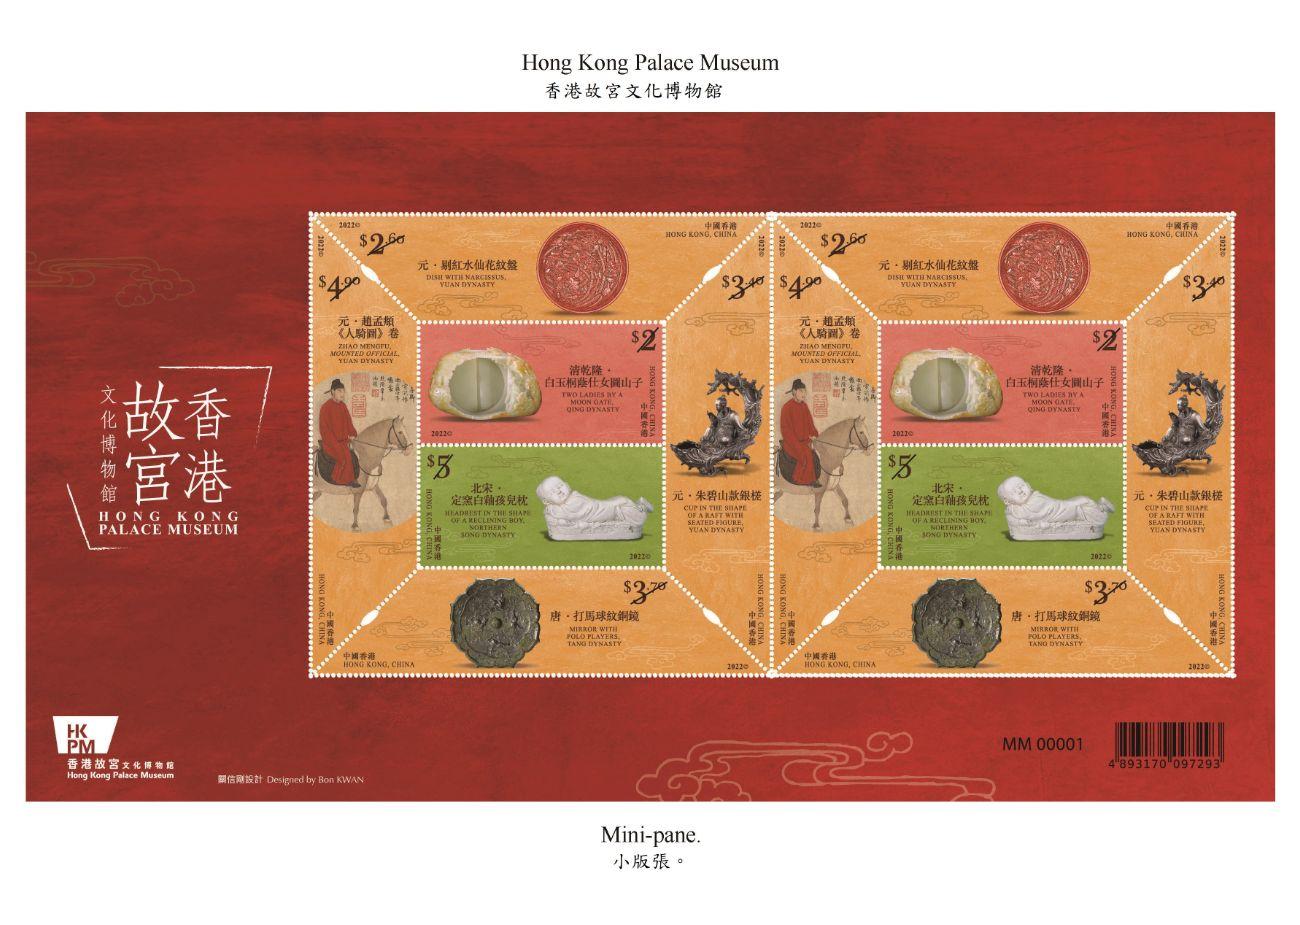 Hongkong Post will launch a special stamp issue and associated philatelic products with the theme "Hong Kong Palace Museum" on June 30 (Thursday). Photo shows the mini-pane.